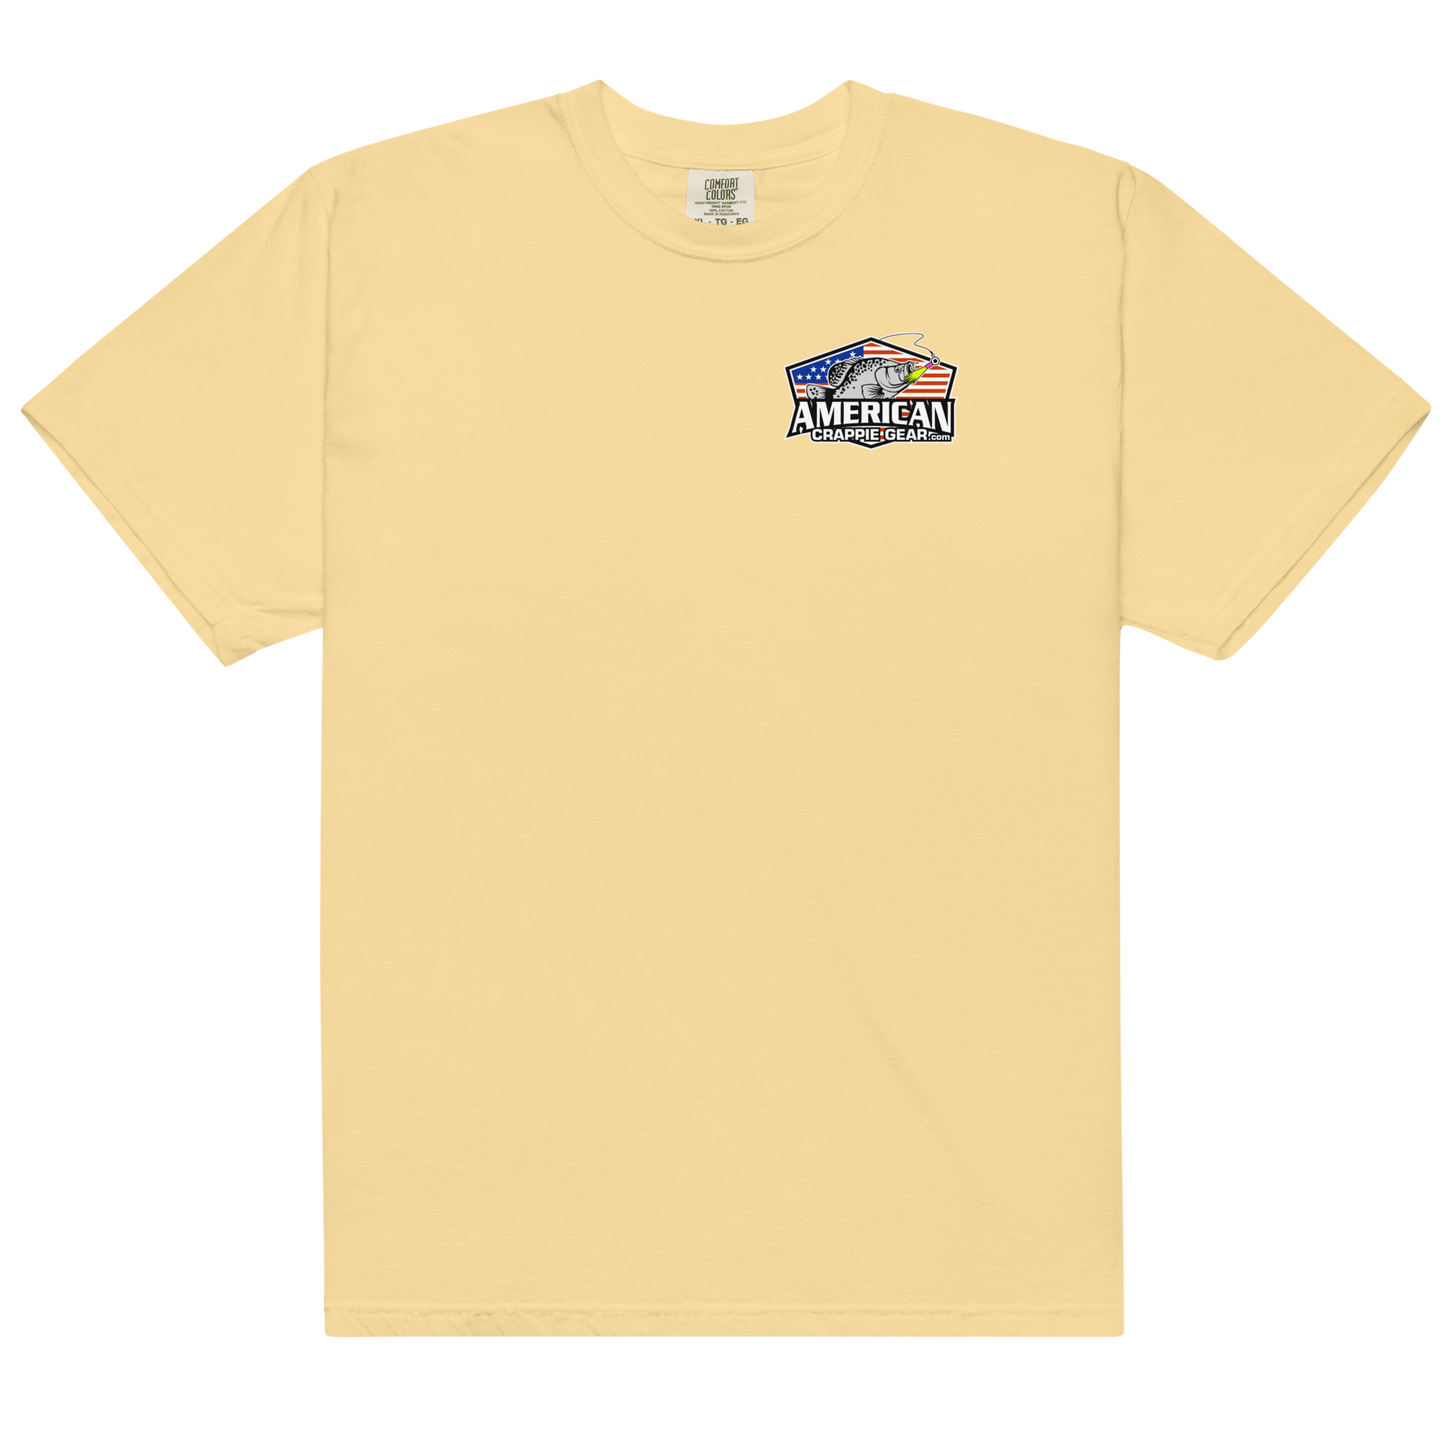 American Crappie Gear-Comfort Colors-Short Sleeve HeavyWeight T-Shirt-15 Color Options!